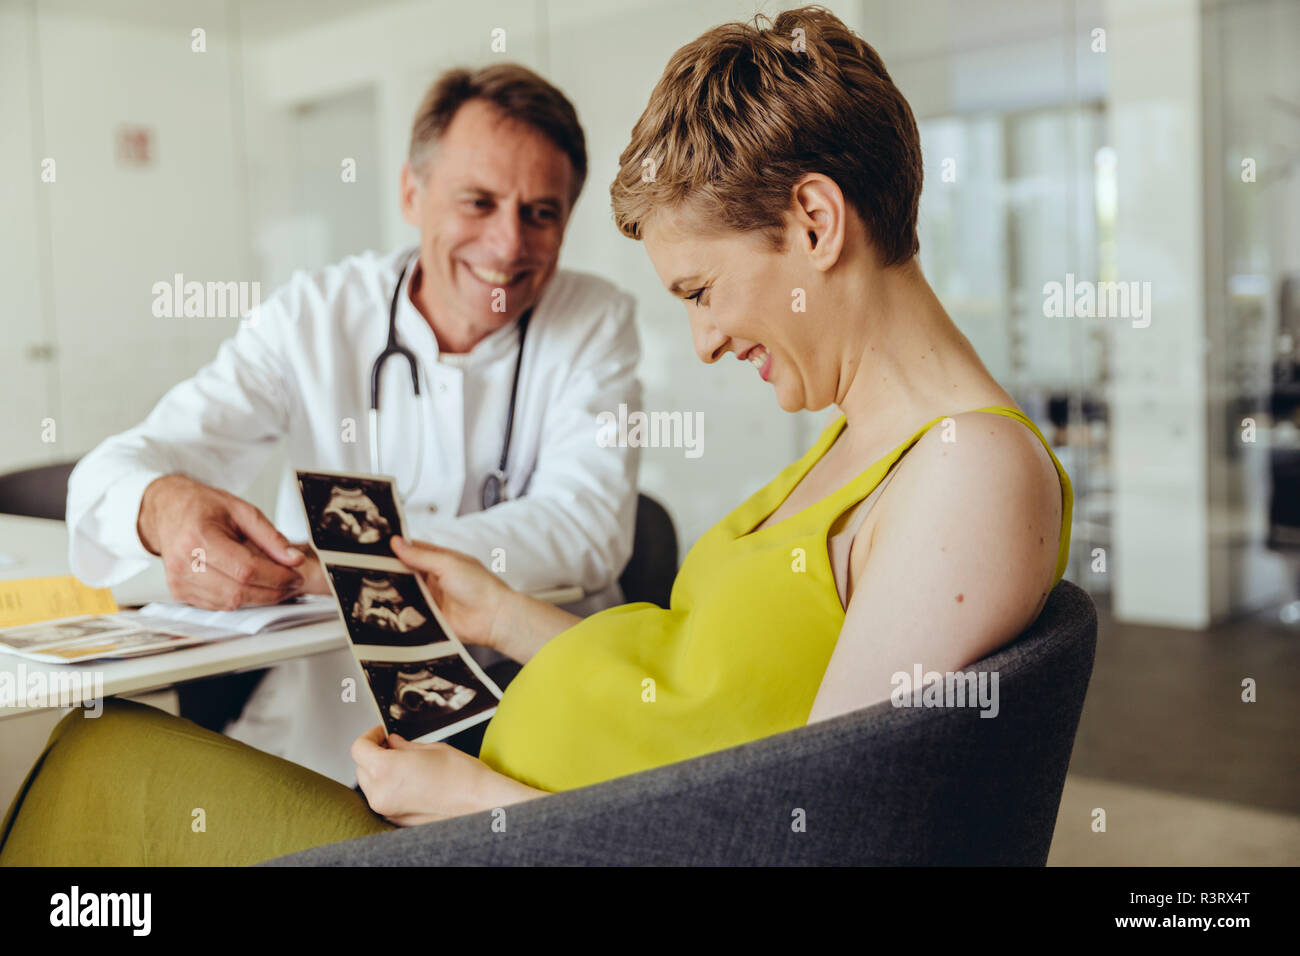 Pregnant woman discussing ultrasonic scans with her doctor Stock Photo